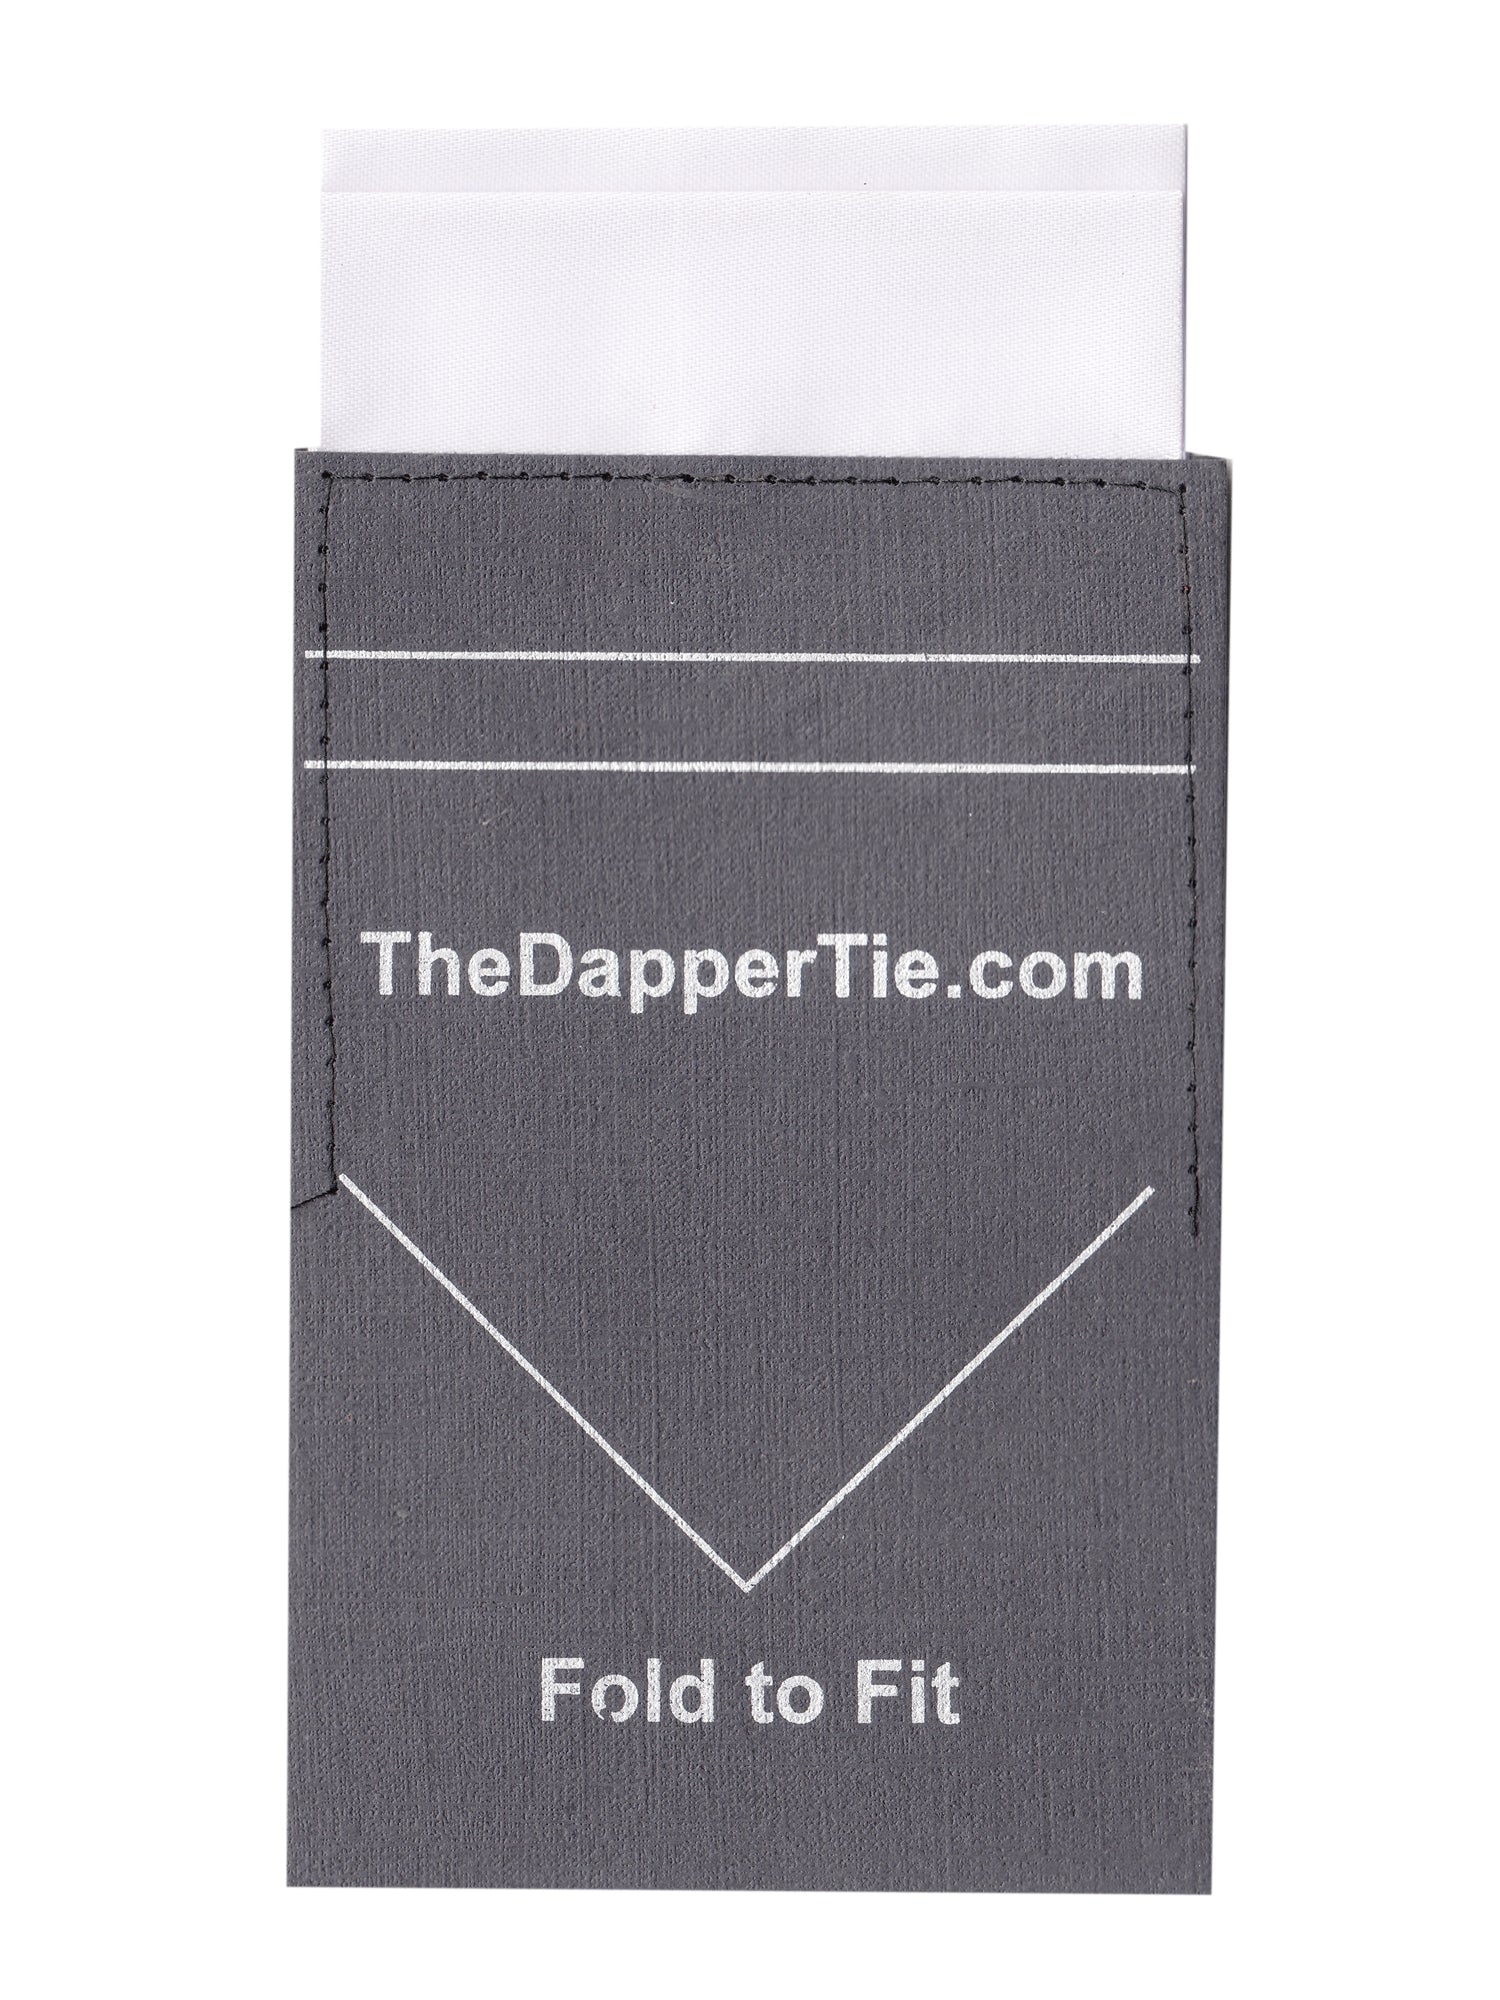 Men's 10 Pack Solid Flat Single, Two Tier Or 4 Point Pre Folded Pocket Square Prefolded Pocket Squares TheDapperTie White Duo 10 Pack Regular 